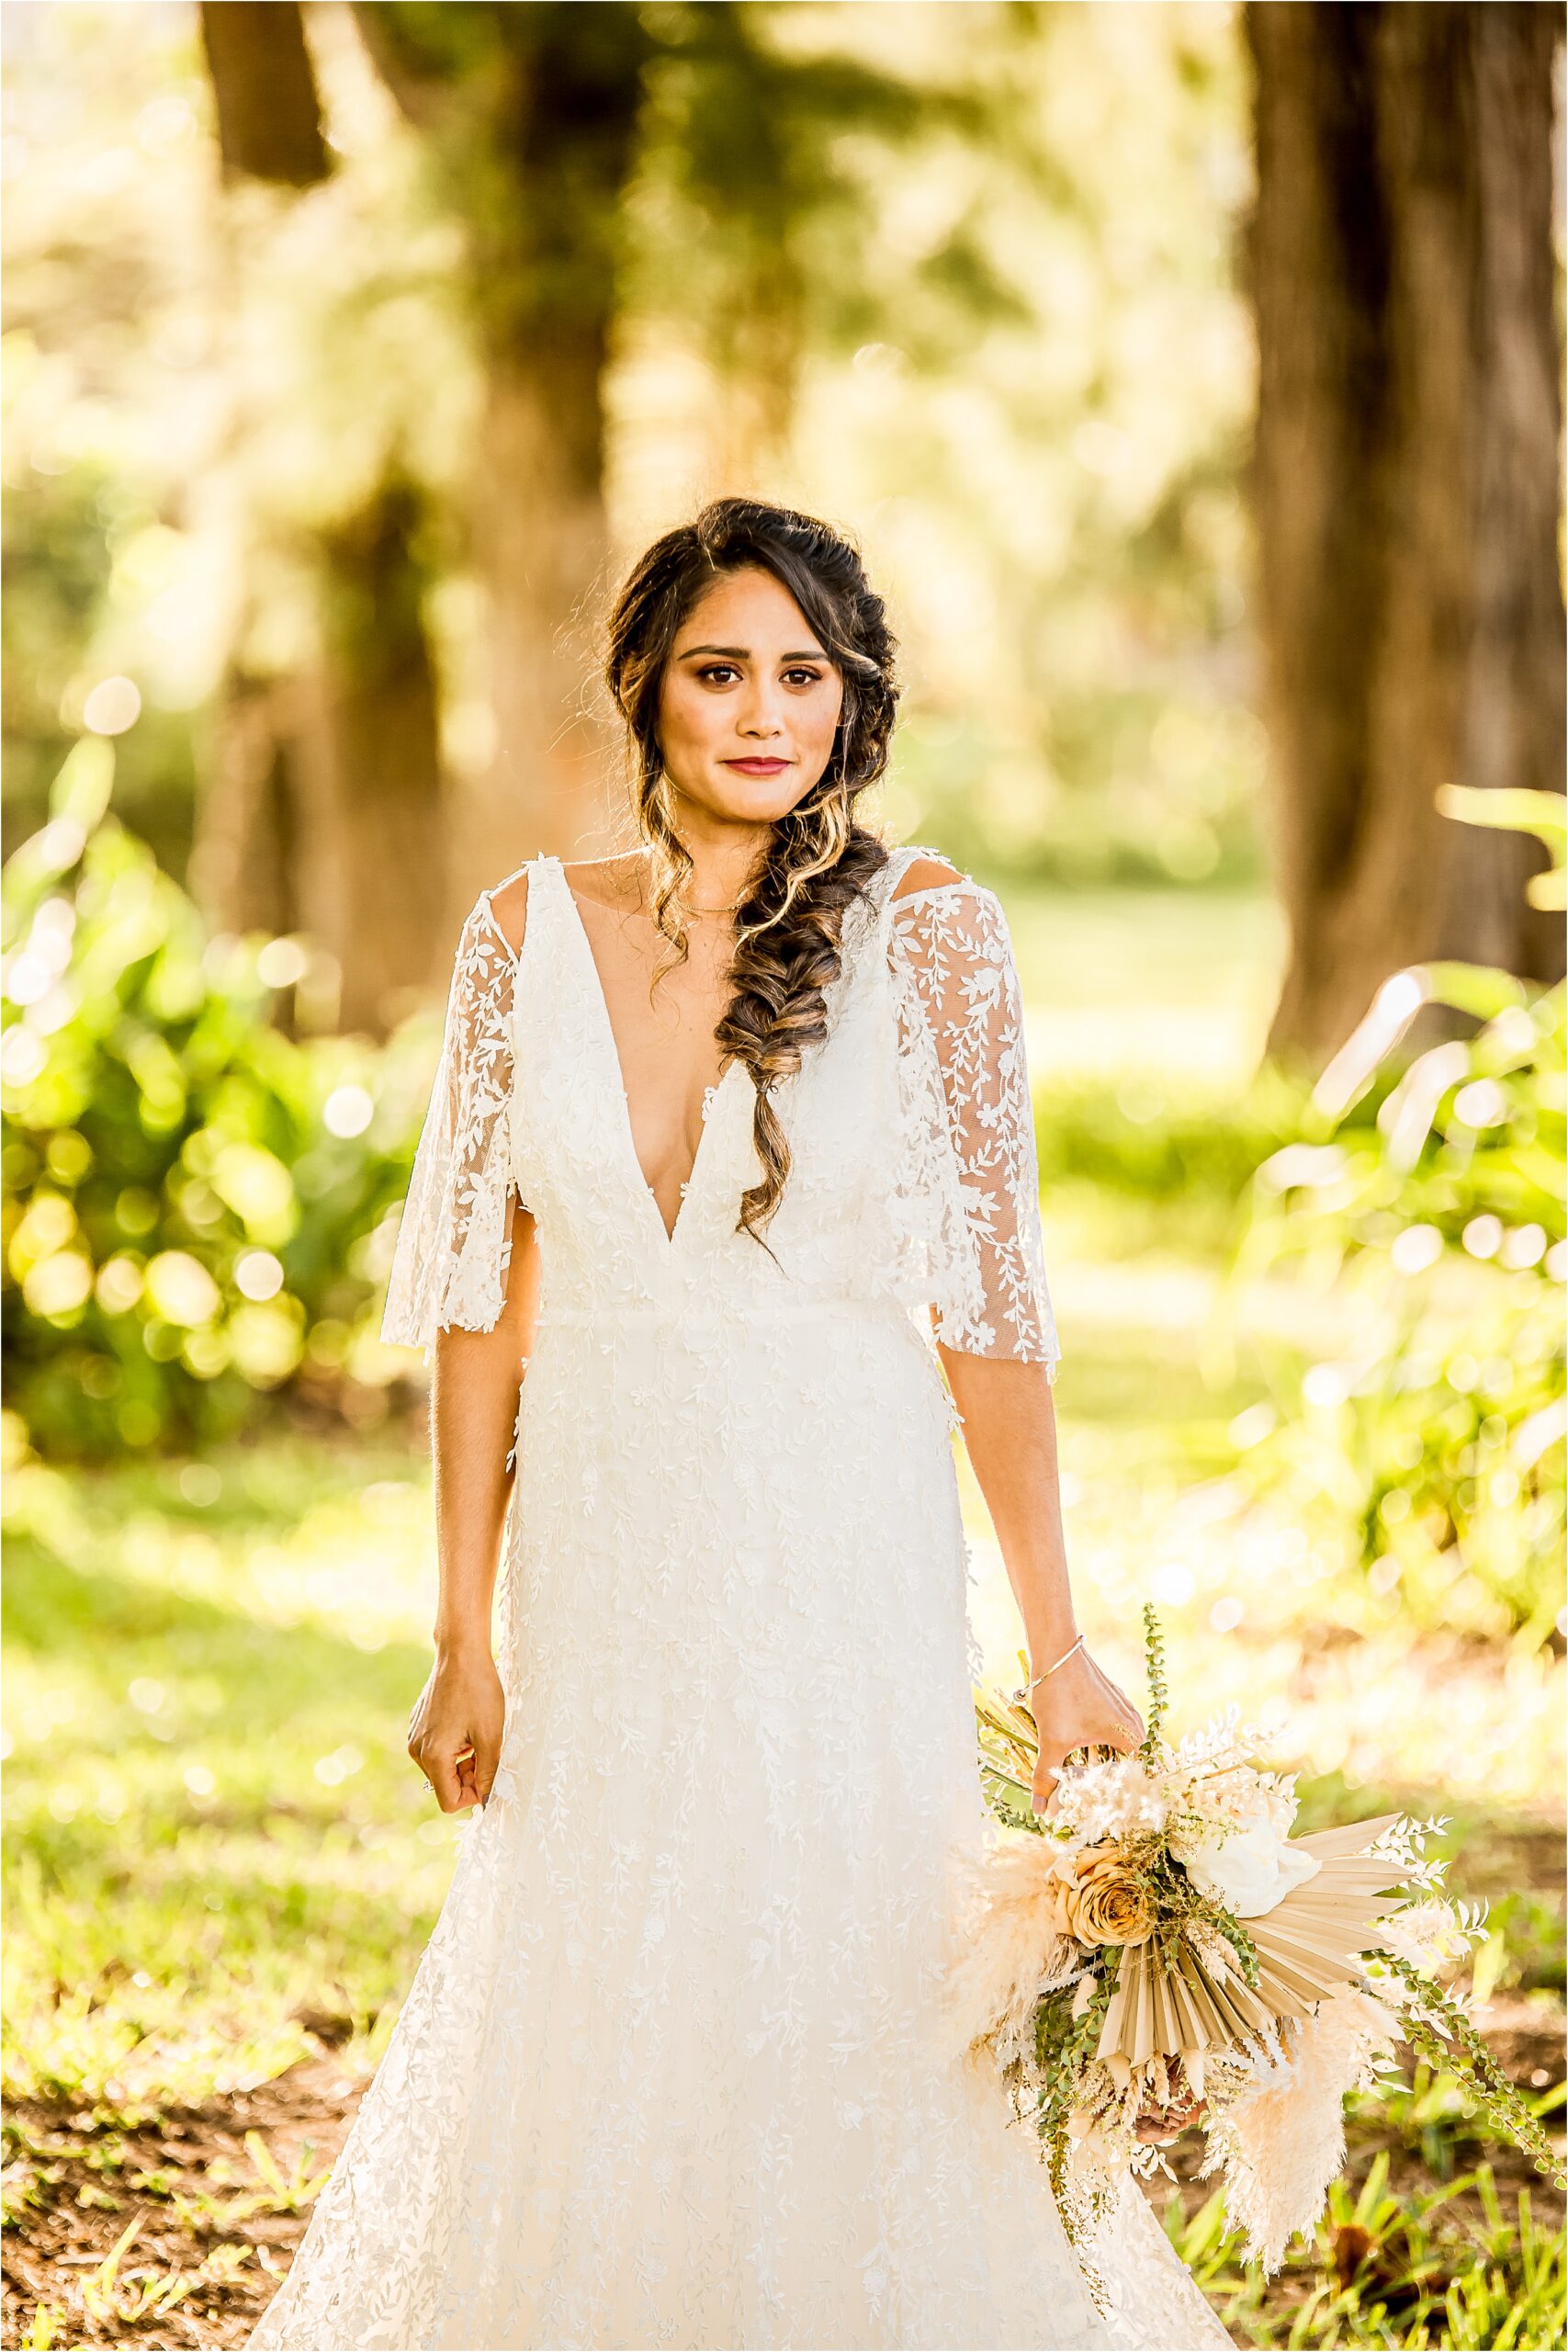 Wedding photography of Bride with a brown hair in a loose braid in her wedding dress